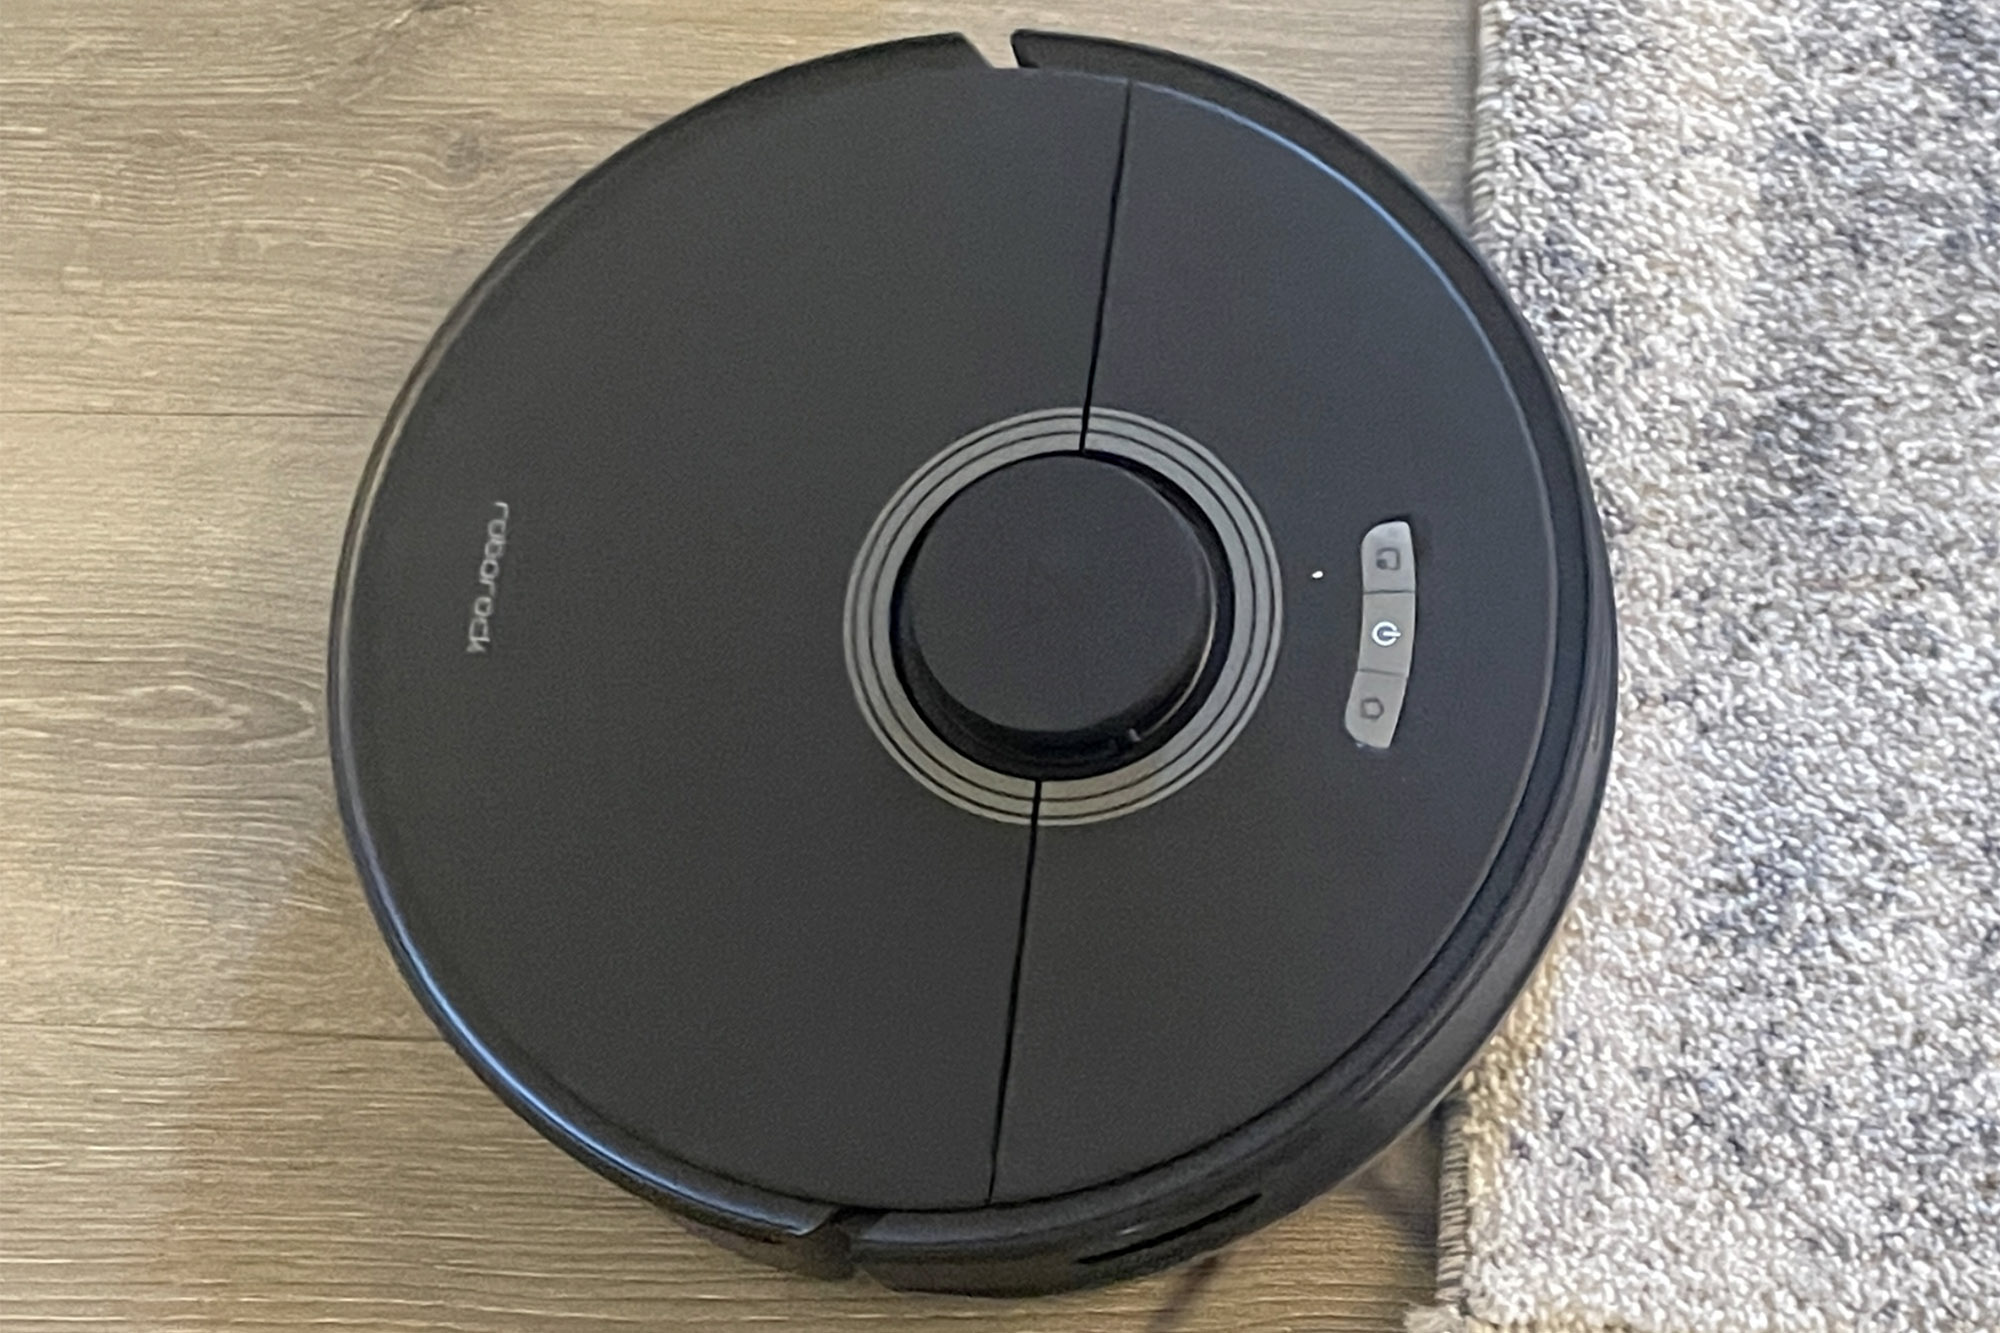 Roborock Q7 Max + review, the powerful vacuum cleaner that washes and  empties itself - GizChina.it